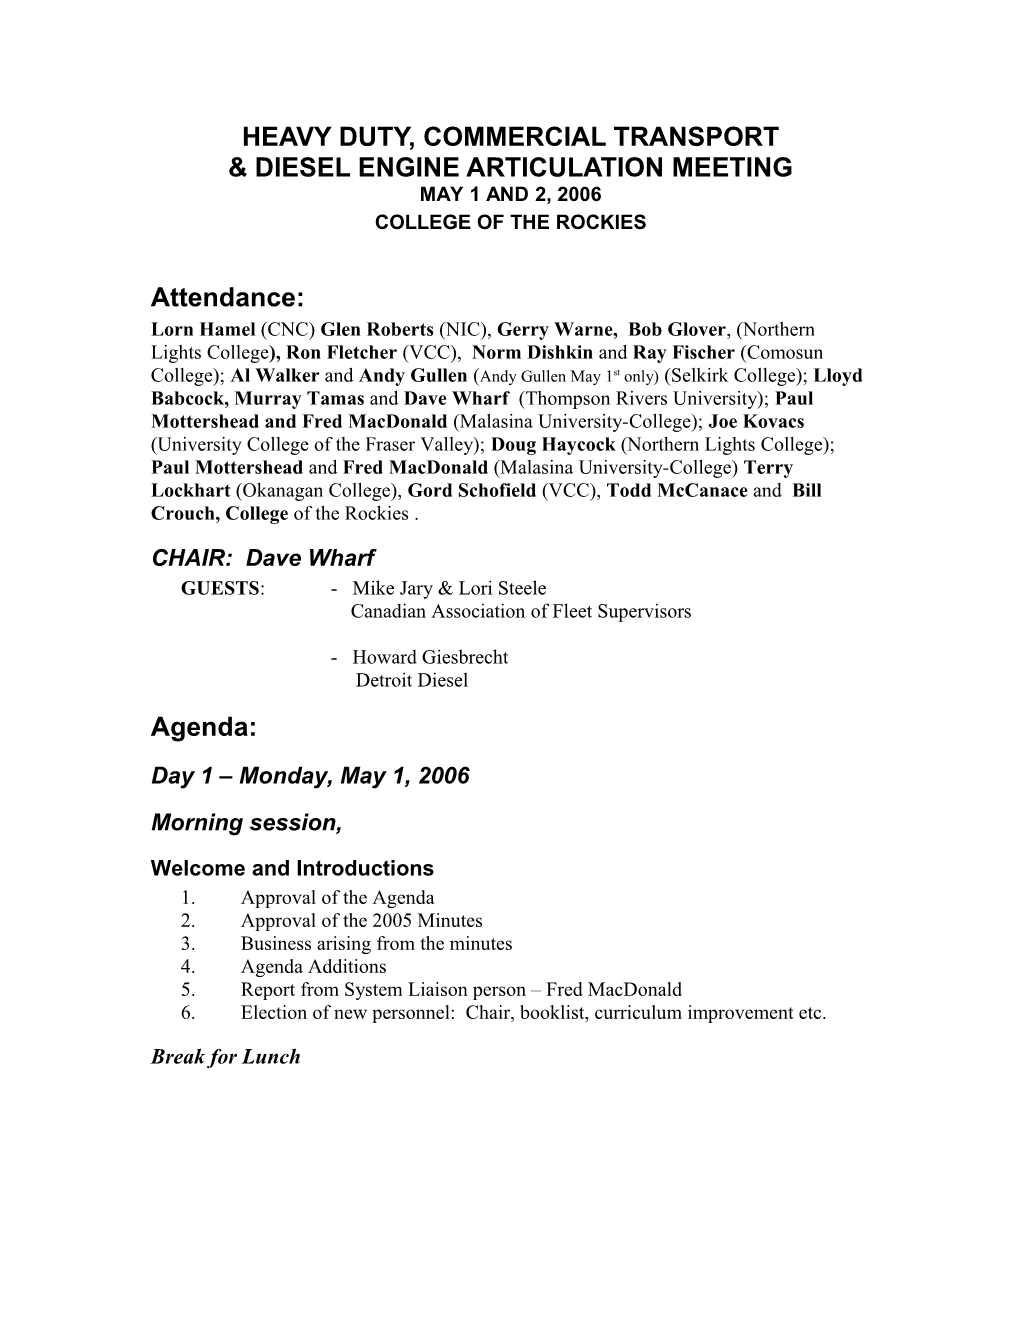 Heavy Duty, Commercial Transport & Diesel Engine Articulation Meeting